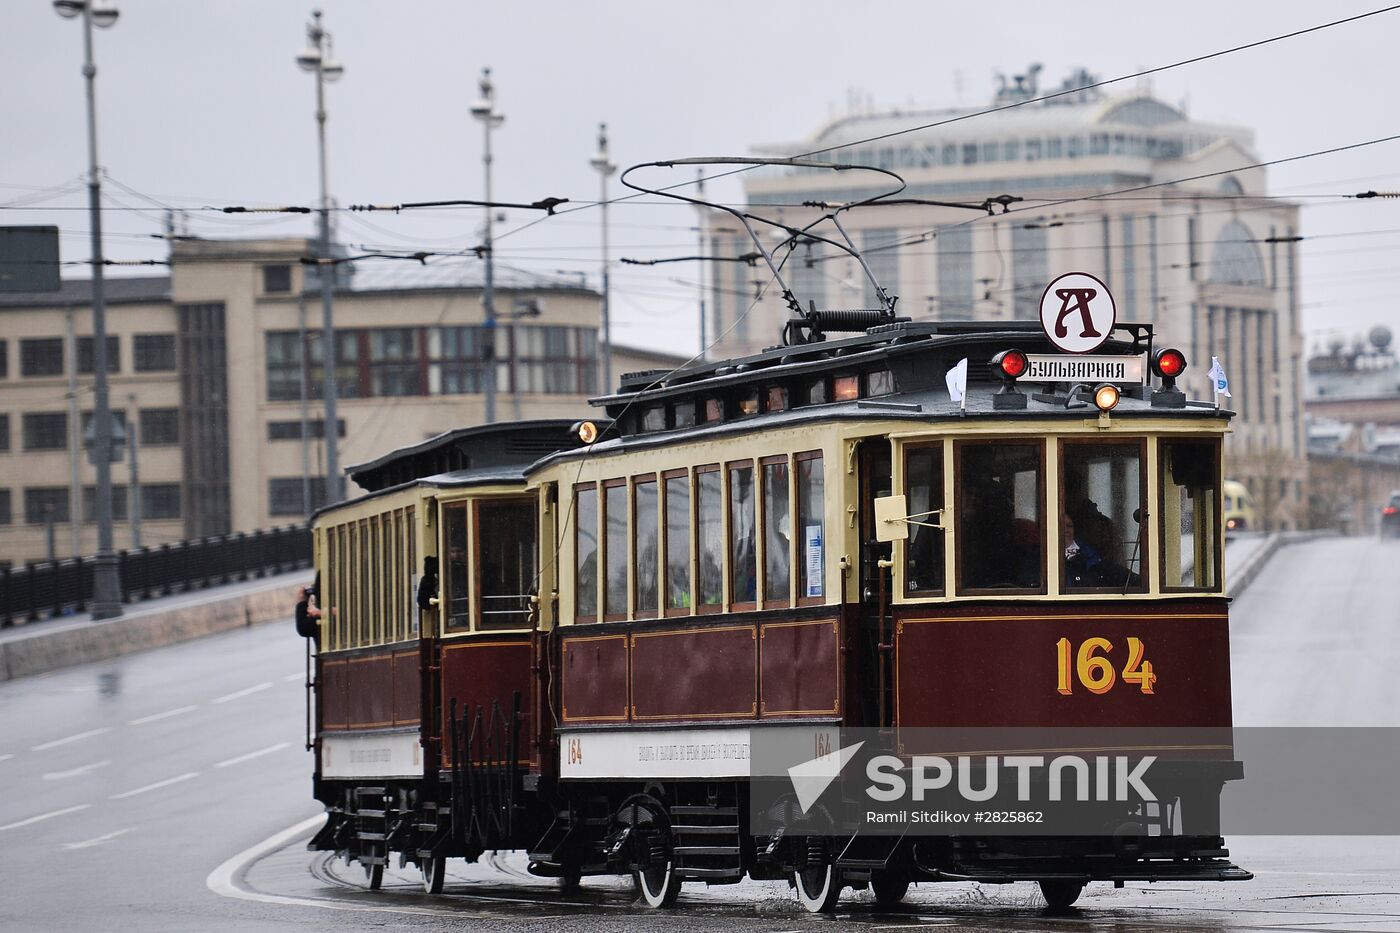 Moscow Tram Festival in Chistye Prudy